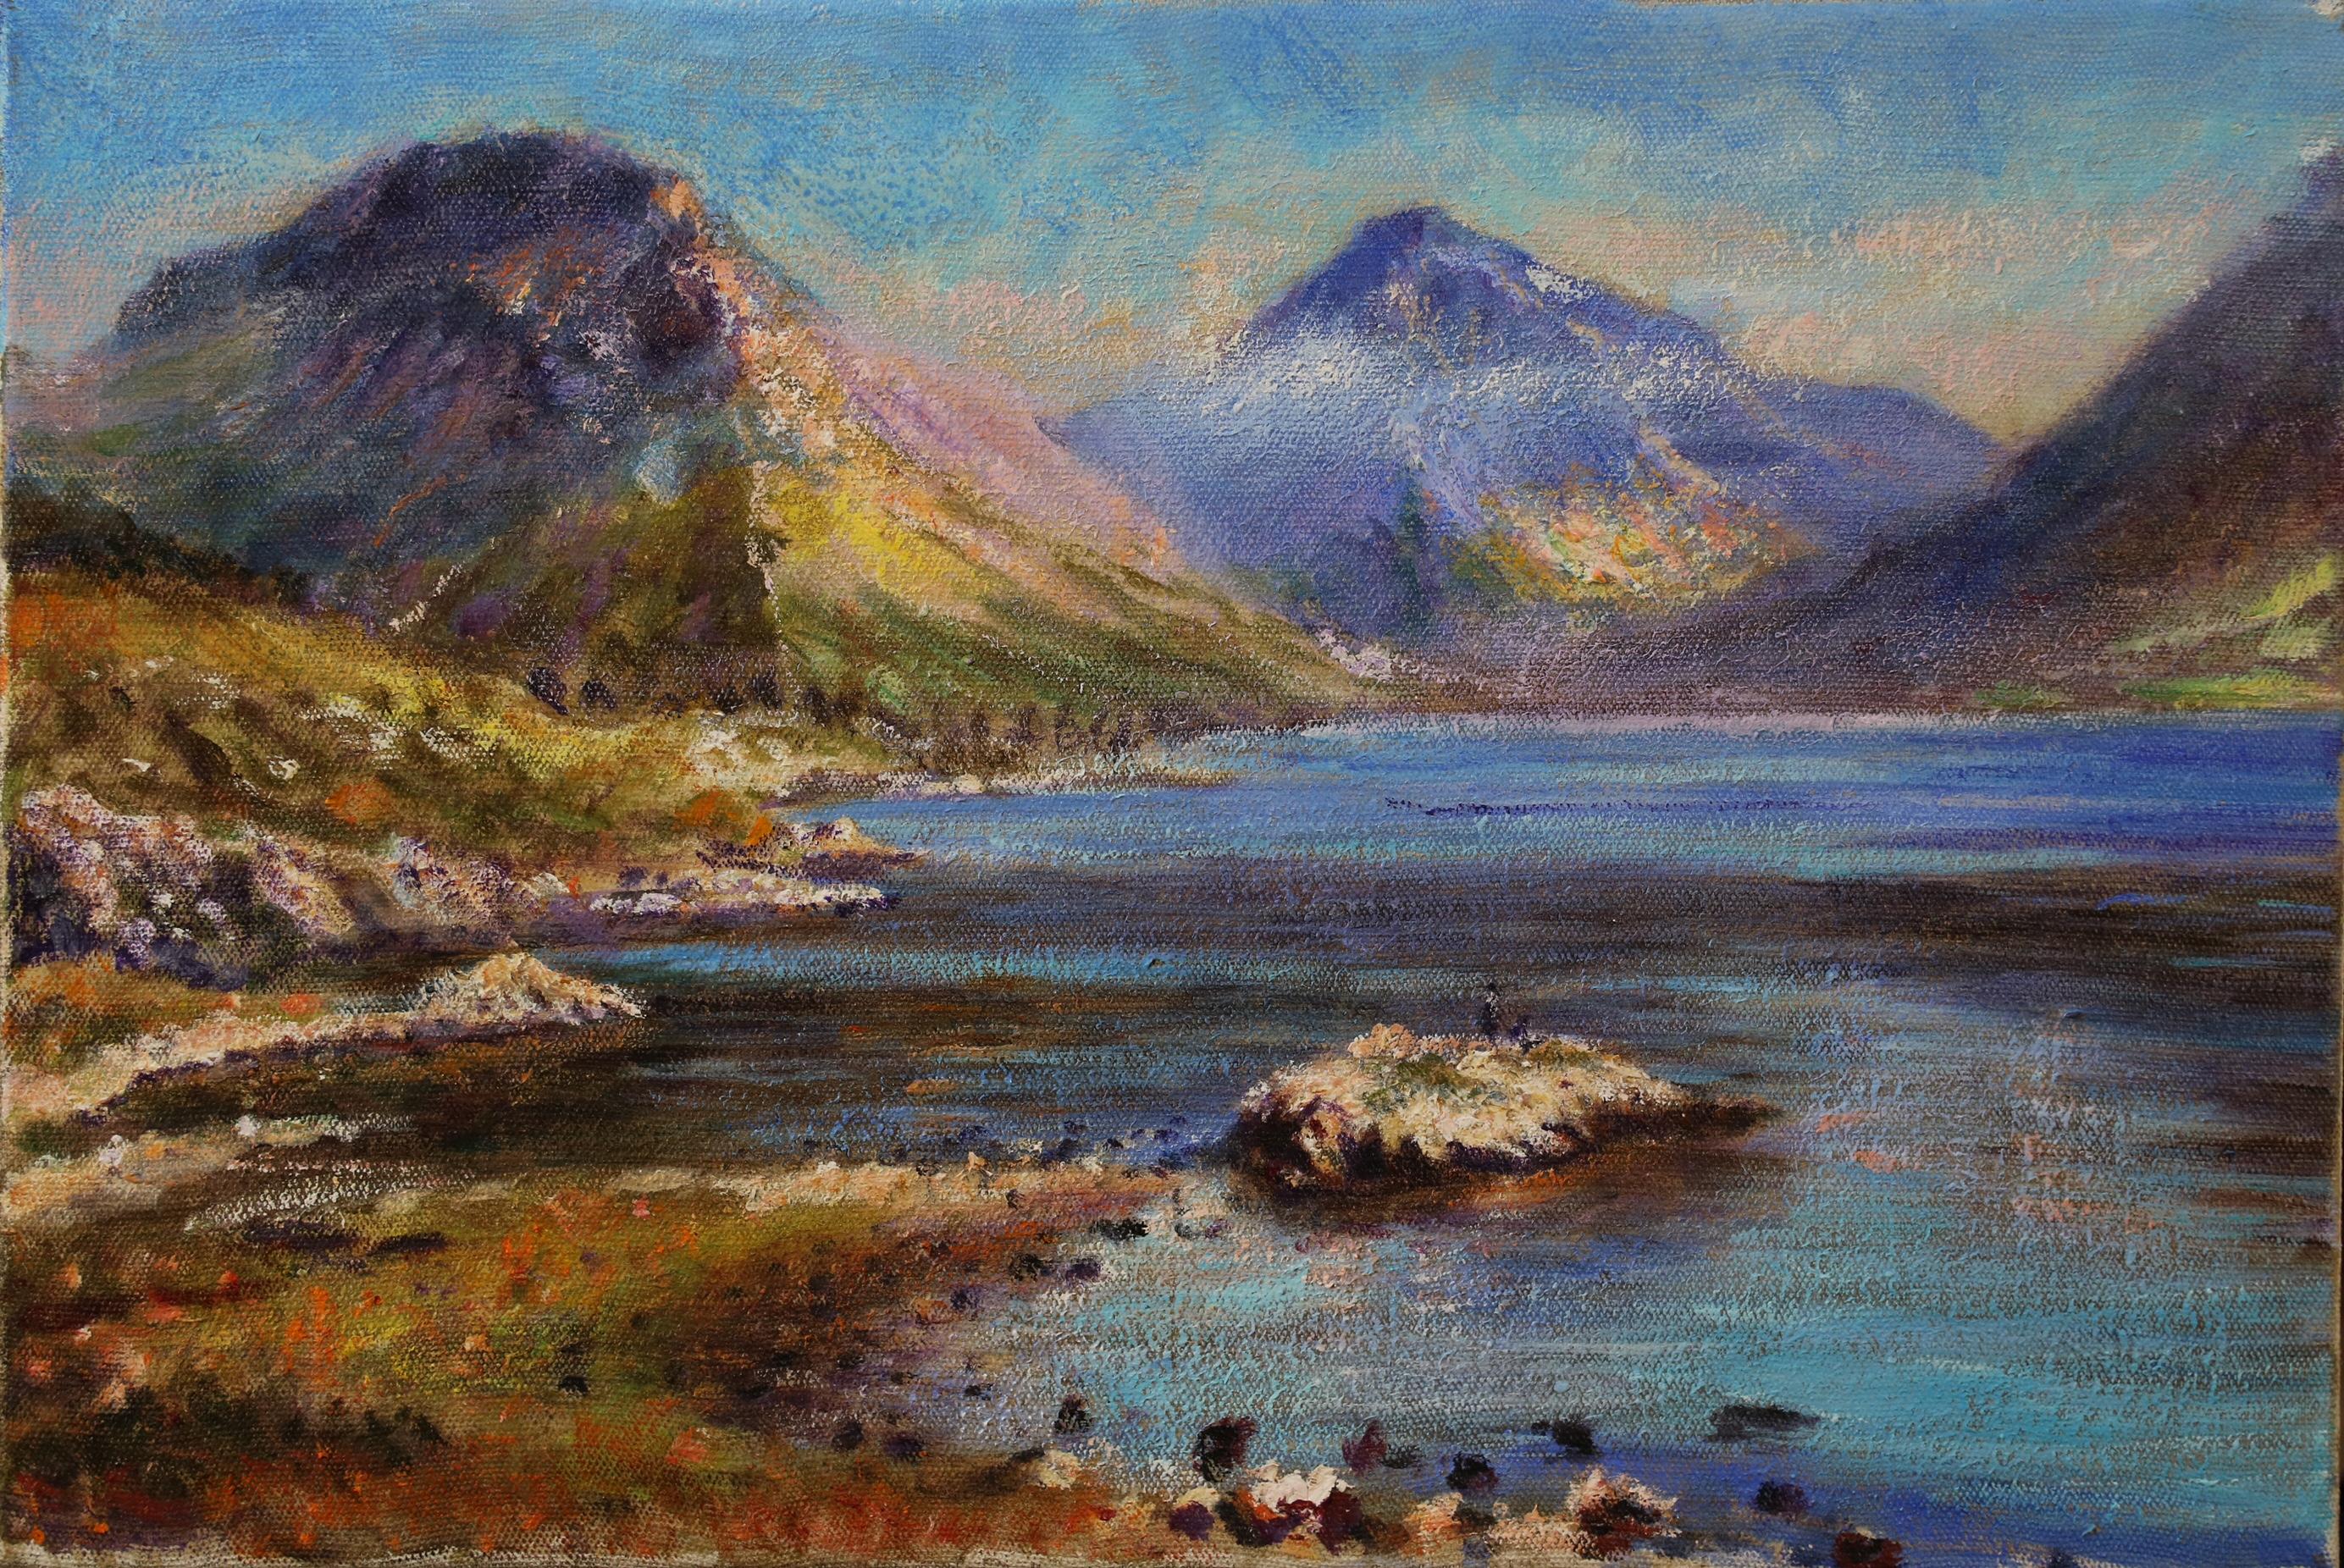 Wastwater, Lake District England. Mountains, Lake and misty sun, original oil - Art by Rene Jerome Legrand